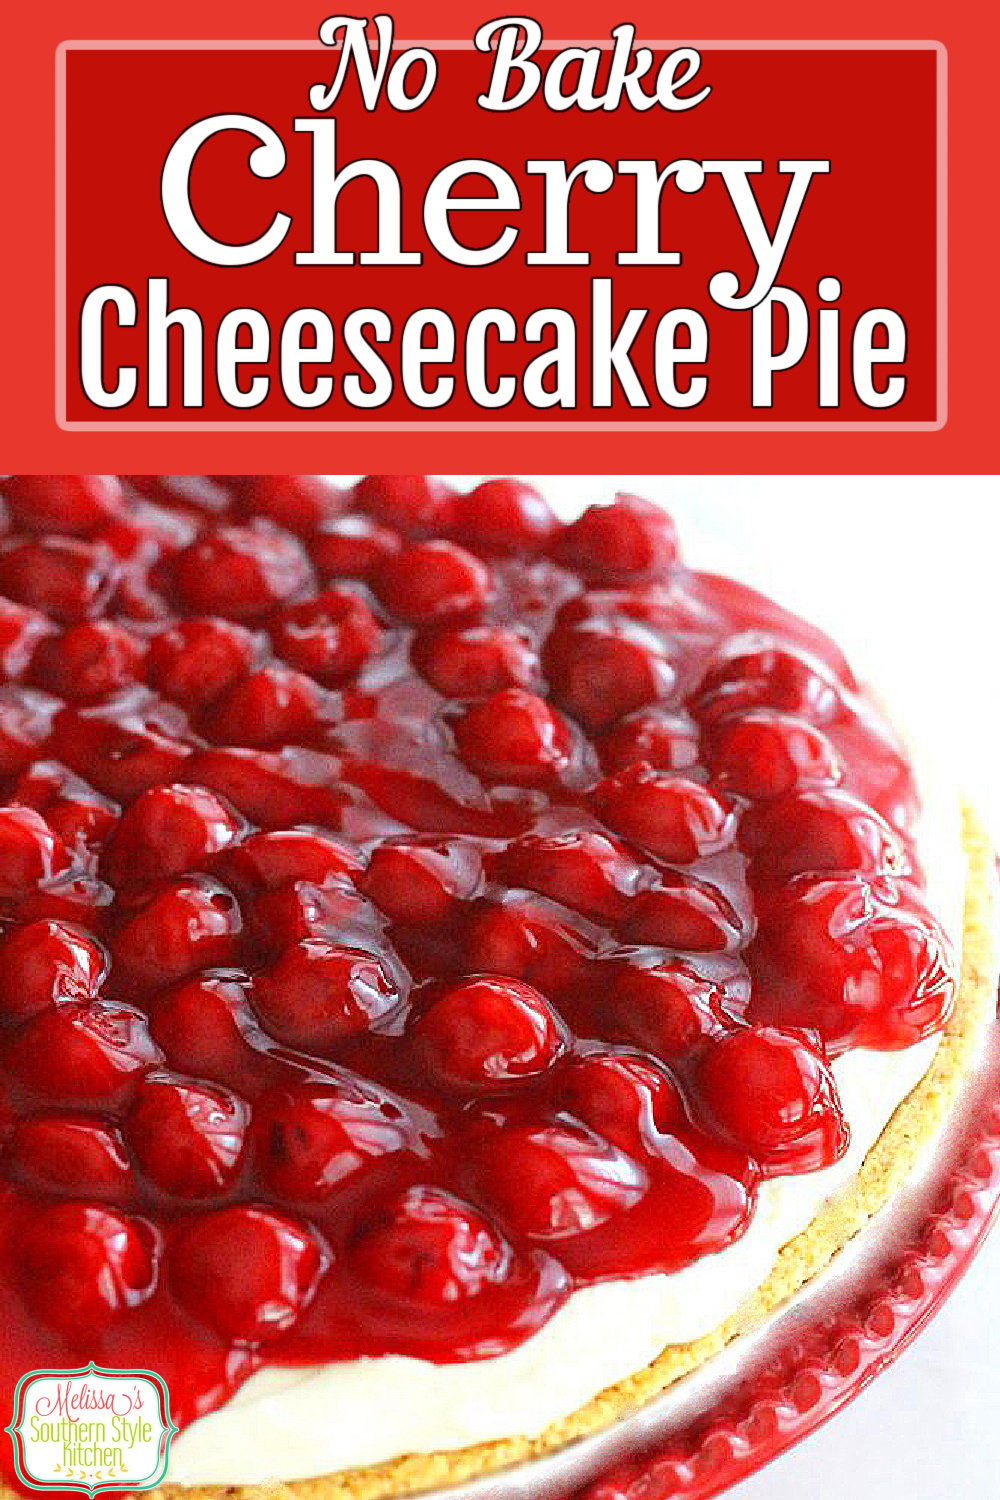 The fluffy filling for this Cherry Cheesecake requires no cooking at all #cherrycheesecake #cheesecakes #cherries #cheesecakerecipes #nobakedesserts #nobakecheesecake #southernfood #southernrecipes #desserts #dessertfoodrecipes via @melissasssk